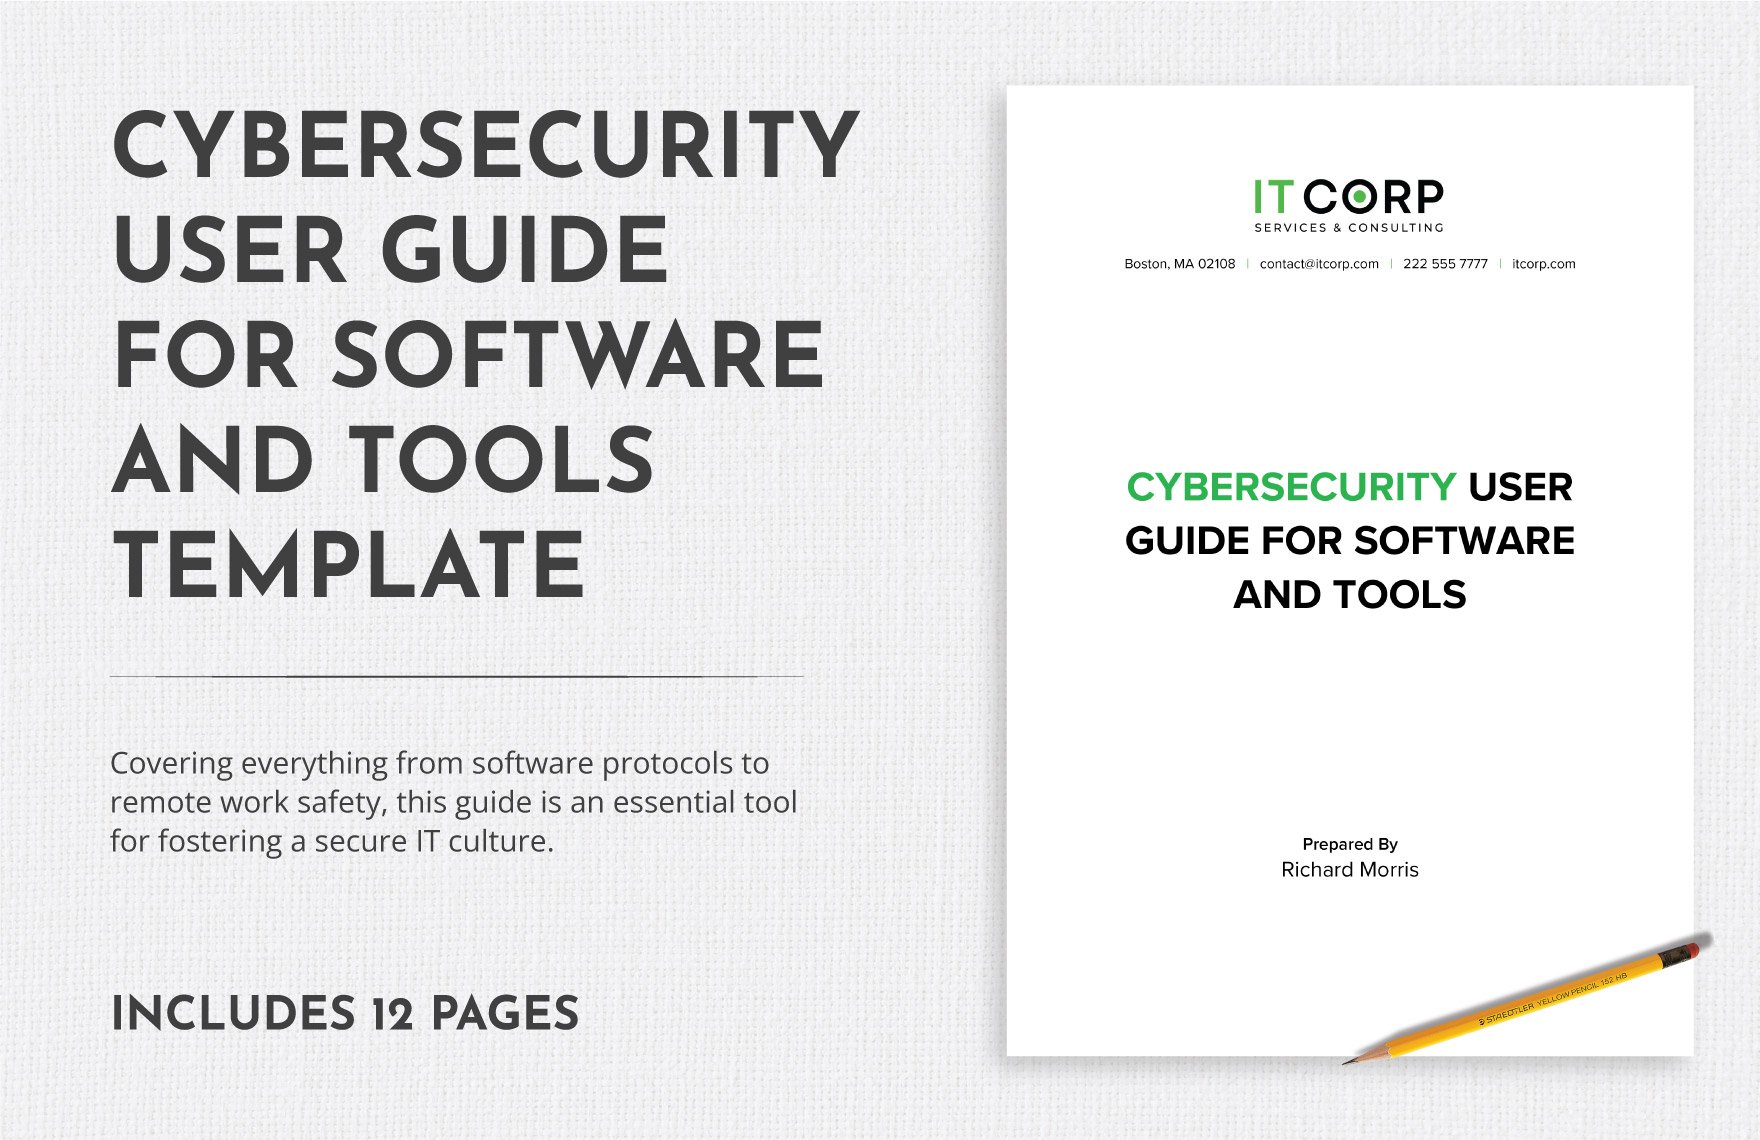 Cybersecurity User Guide for Software and Tools Template